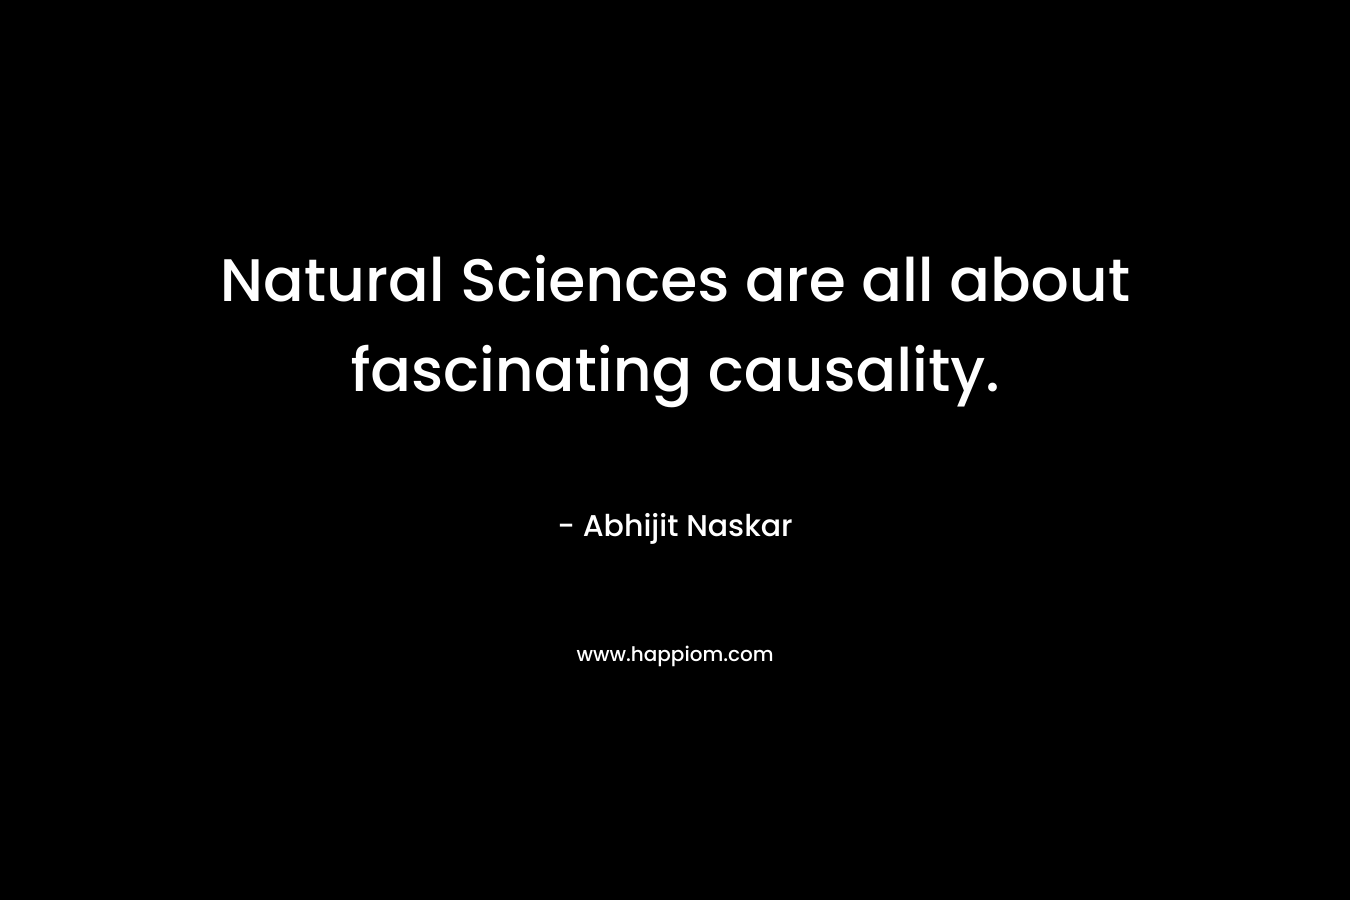 Natural Sciences are all about fascinating causality. – Abhijit Naskar